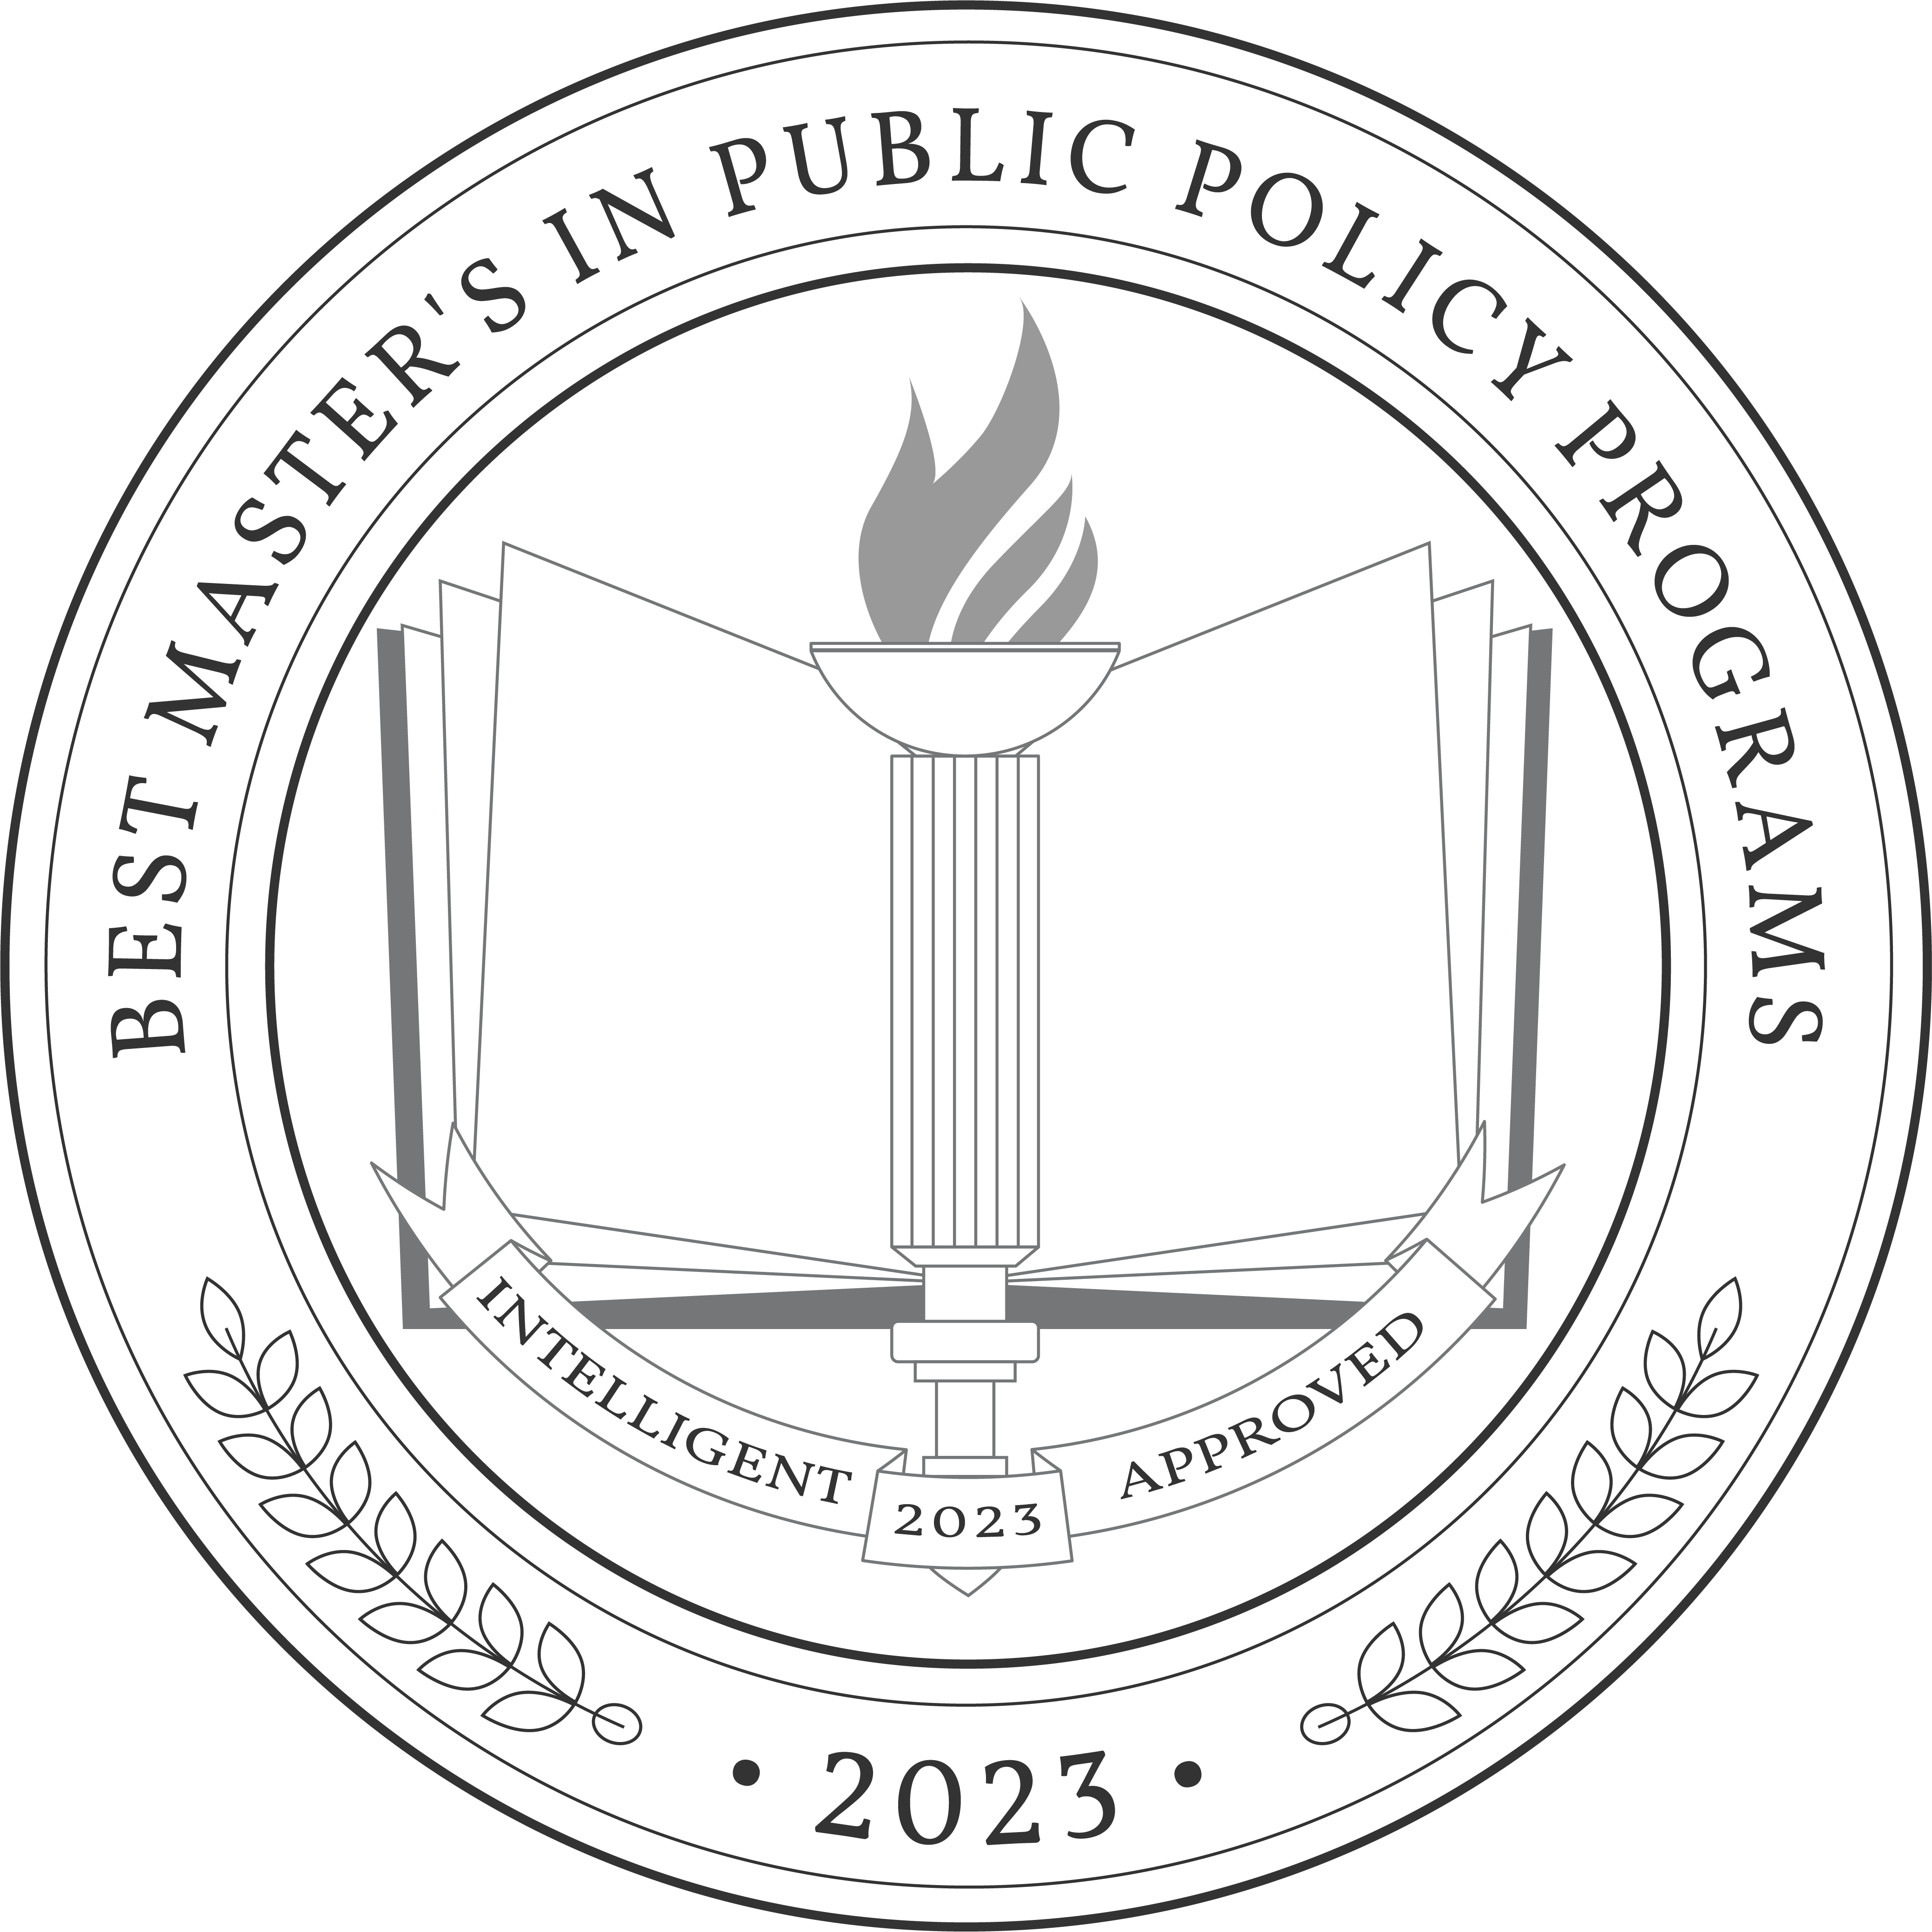 Best Master's in Public Policy Programs 2023